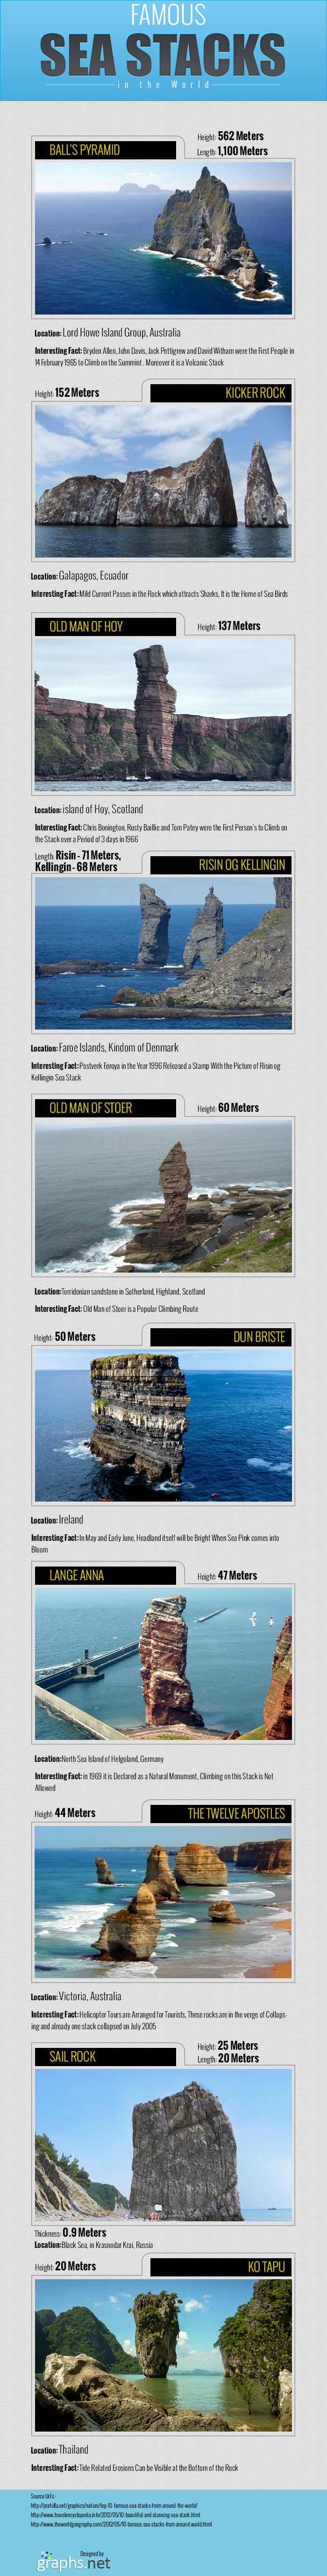 Infographic - Famous-sea-stacks-in-the-world